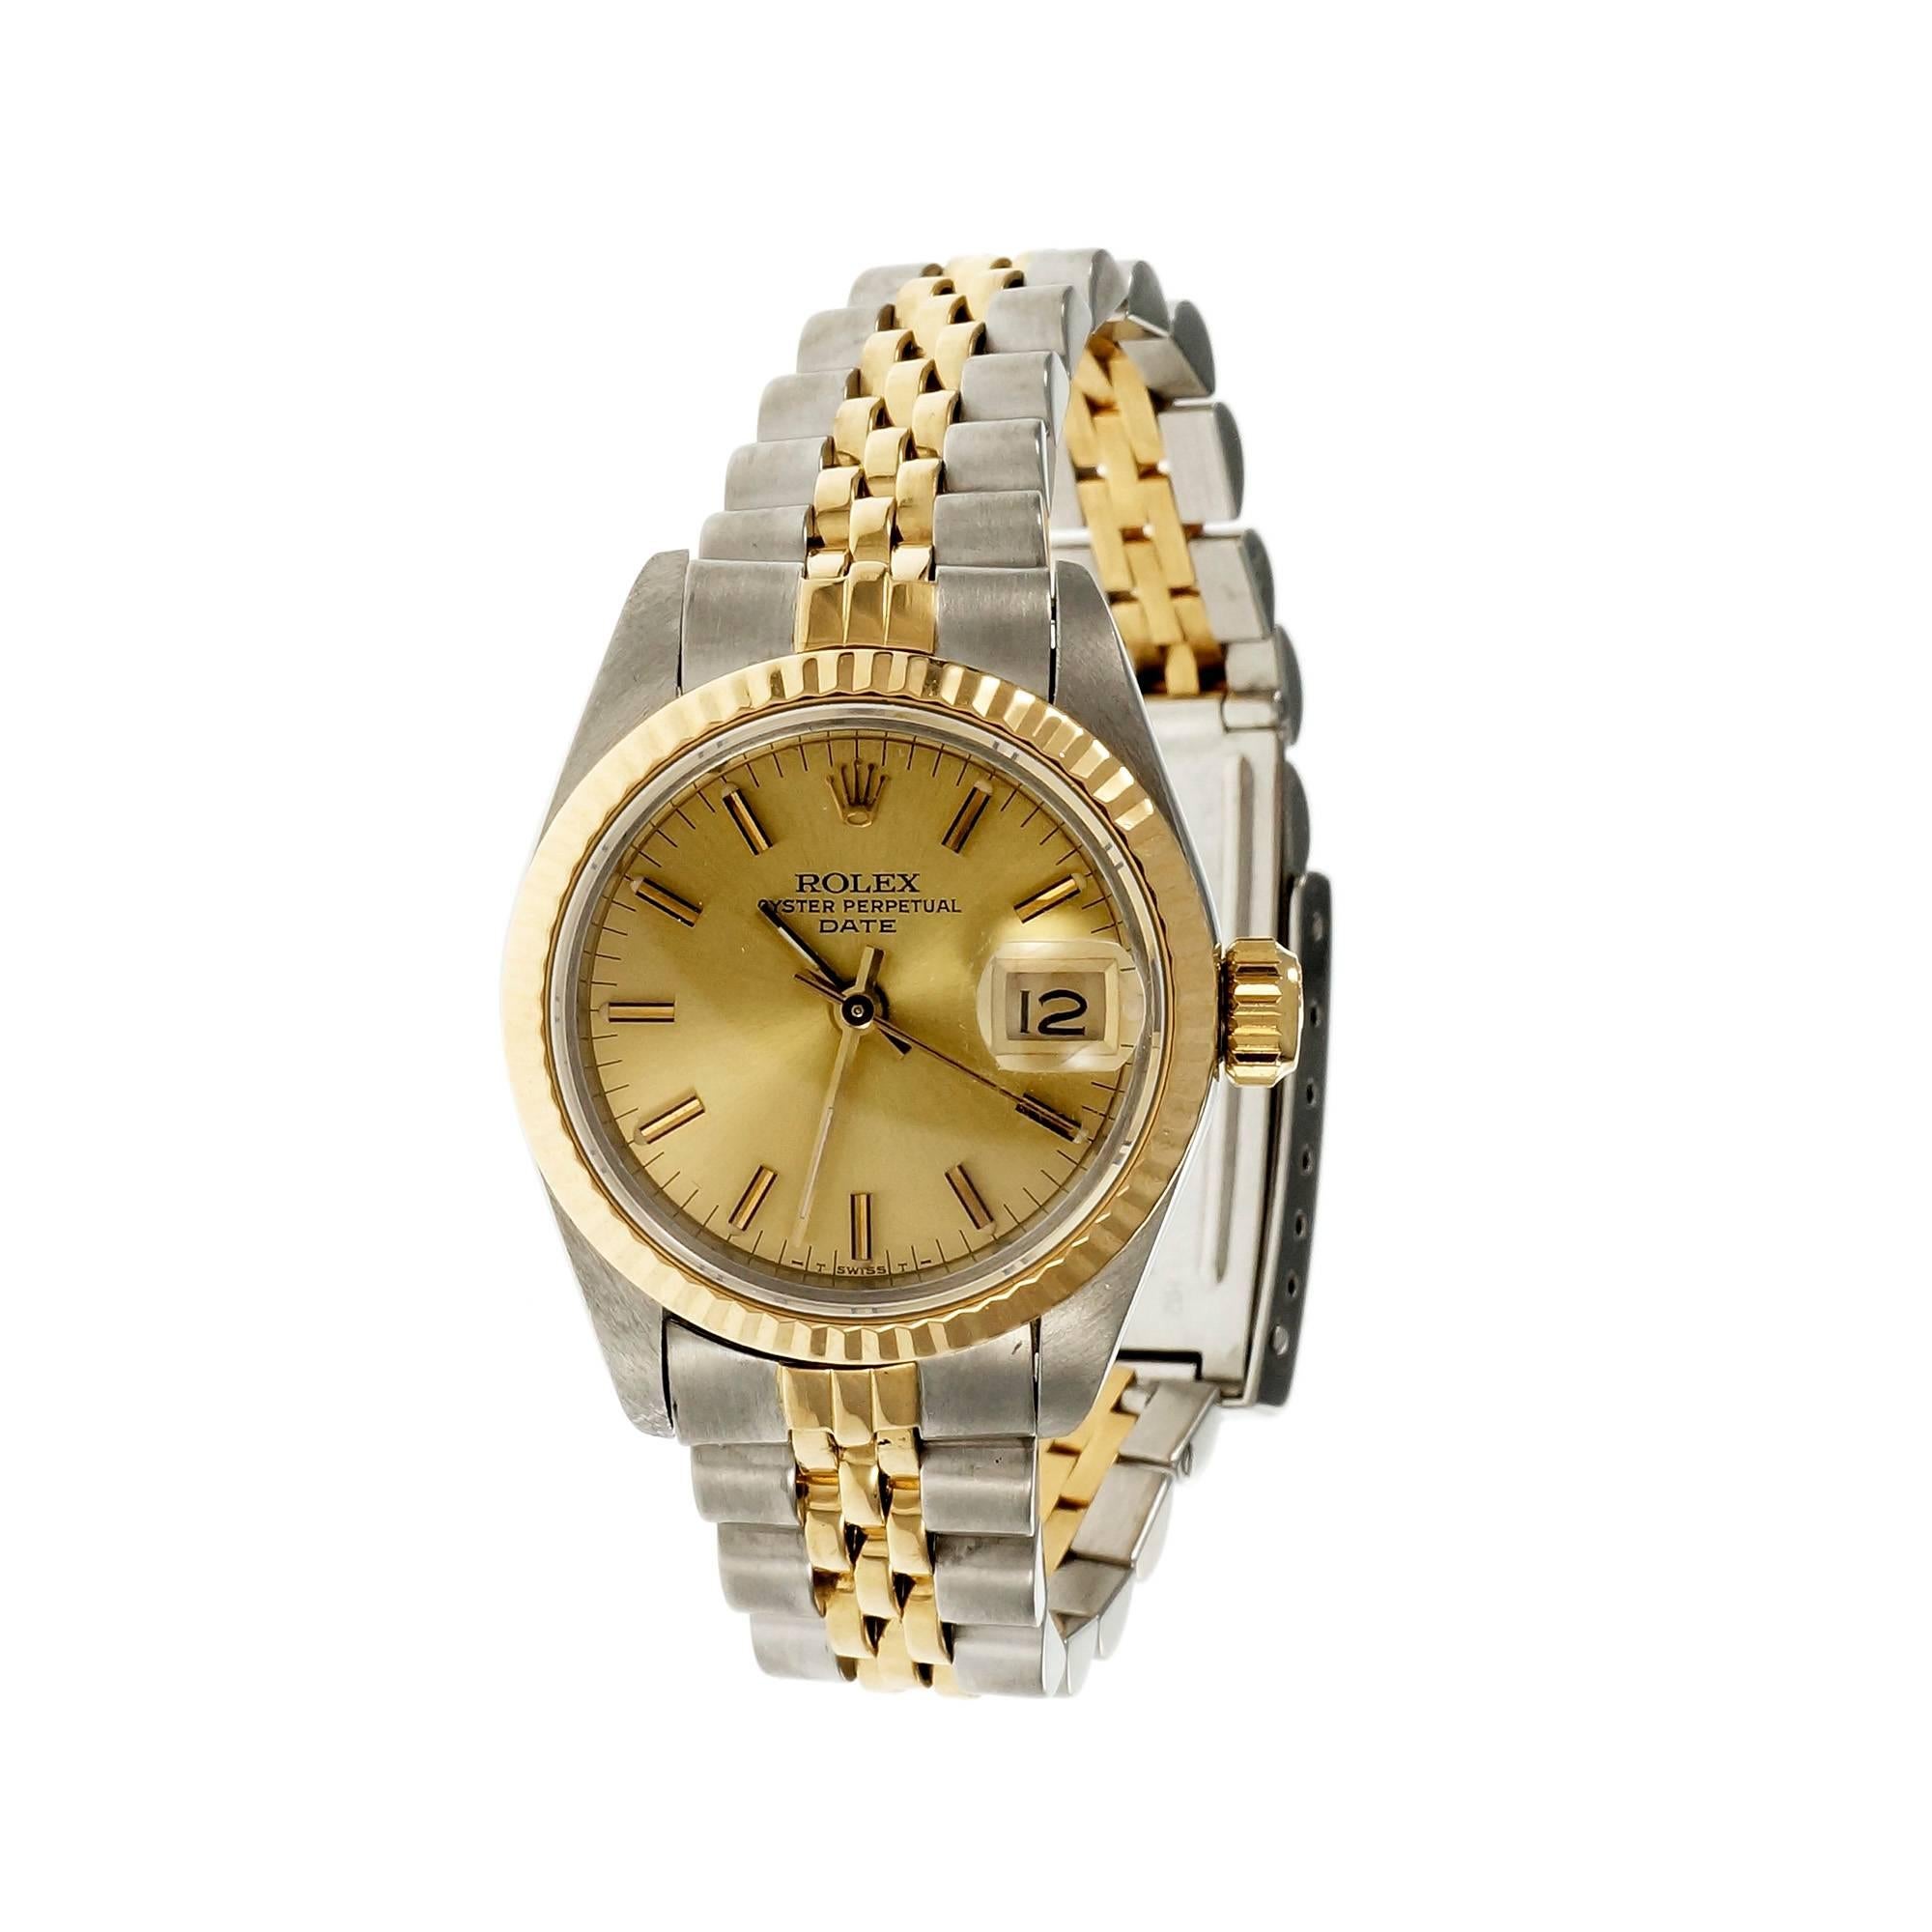 Ladies Rolex 18k gold and steel Date wrist watch. Very little band stretch. Gold tone rich looking stick figure dial. Circa 1984.

18k yellow gold 
 Steel
54 grams
Band length:6.5 inches – links are available
Length: 31.7mm
Width: 26mm
Band width at